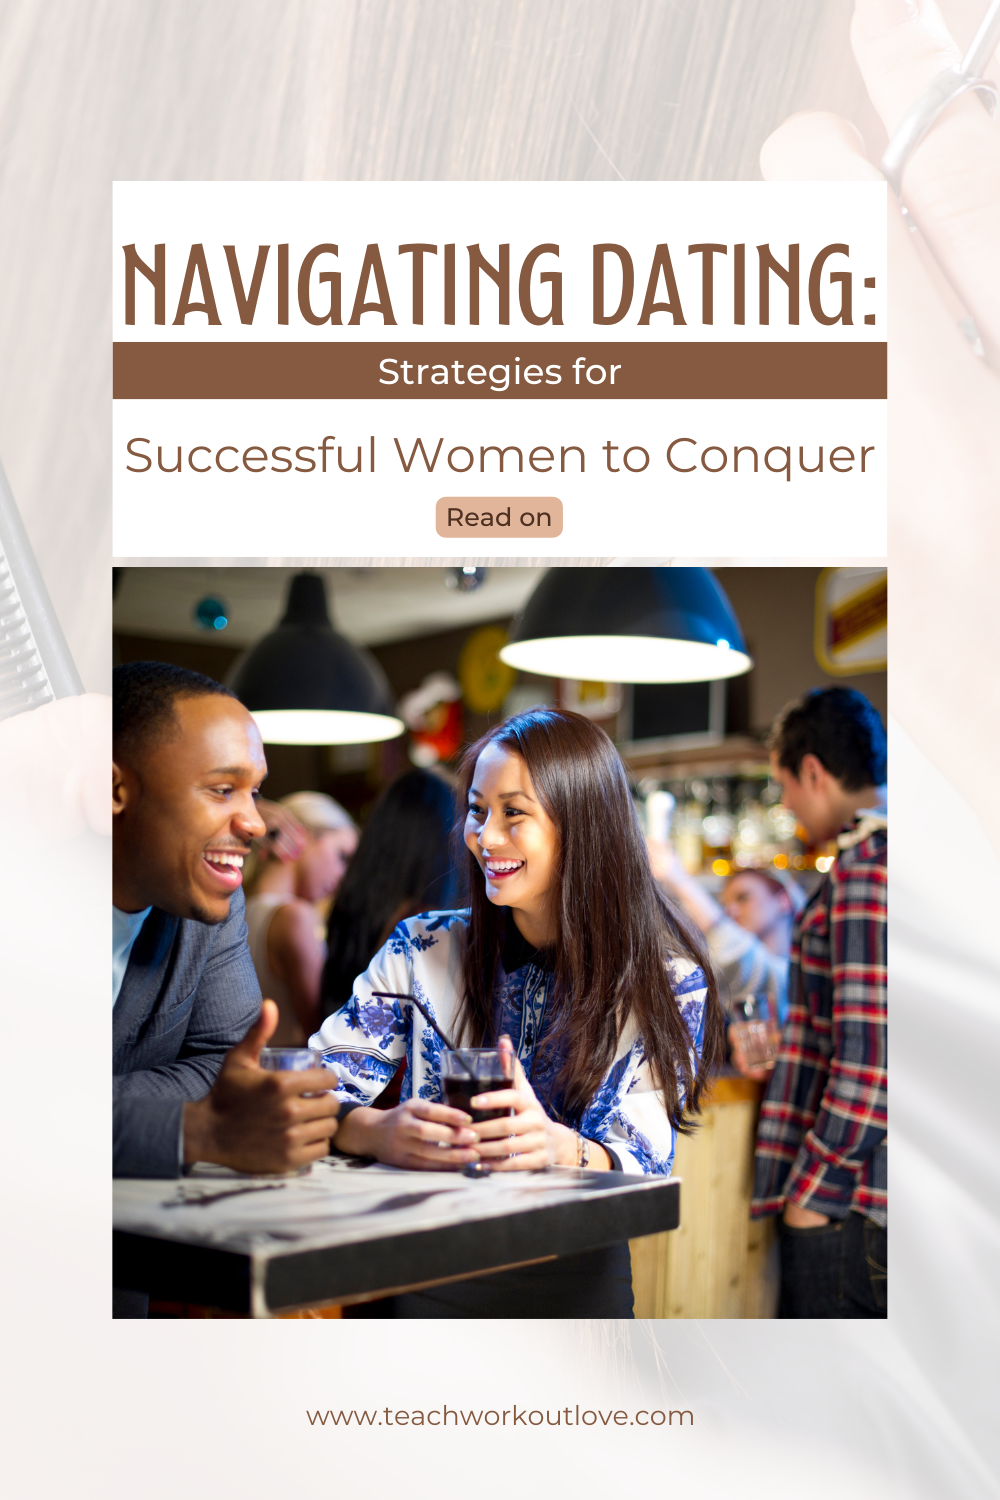 More often than not, we have encountered successful women who preferred staying single instead of dating. This is because sometimes, with professional success, comes a deep fear of losing out on other life experiences due to being committed. While this is completely understandable anxiety, the good news is, you do not have to limit yourself to success only on the professional front. Navigating the dating world is a herculean task at times, which is why we are here to help you.